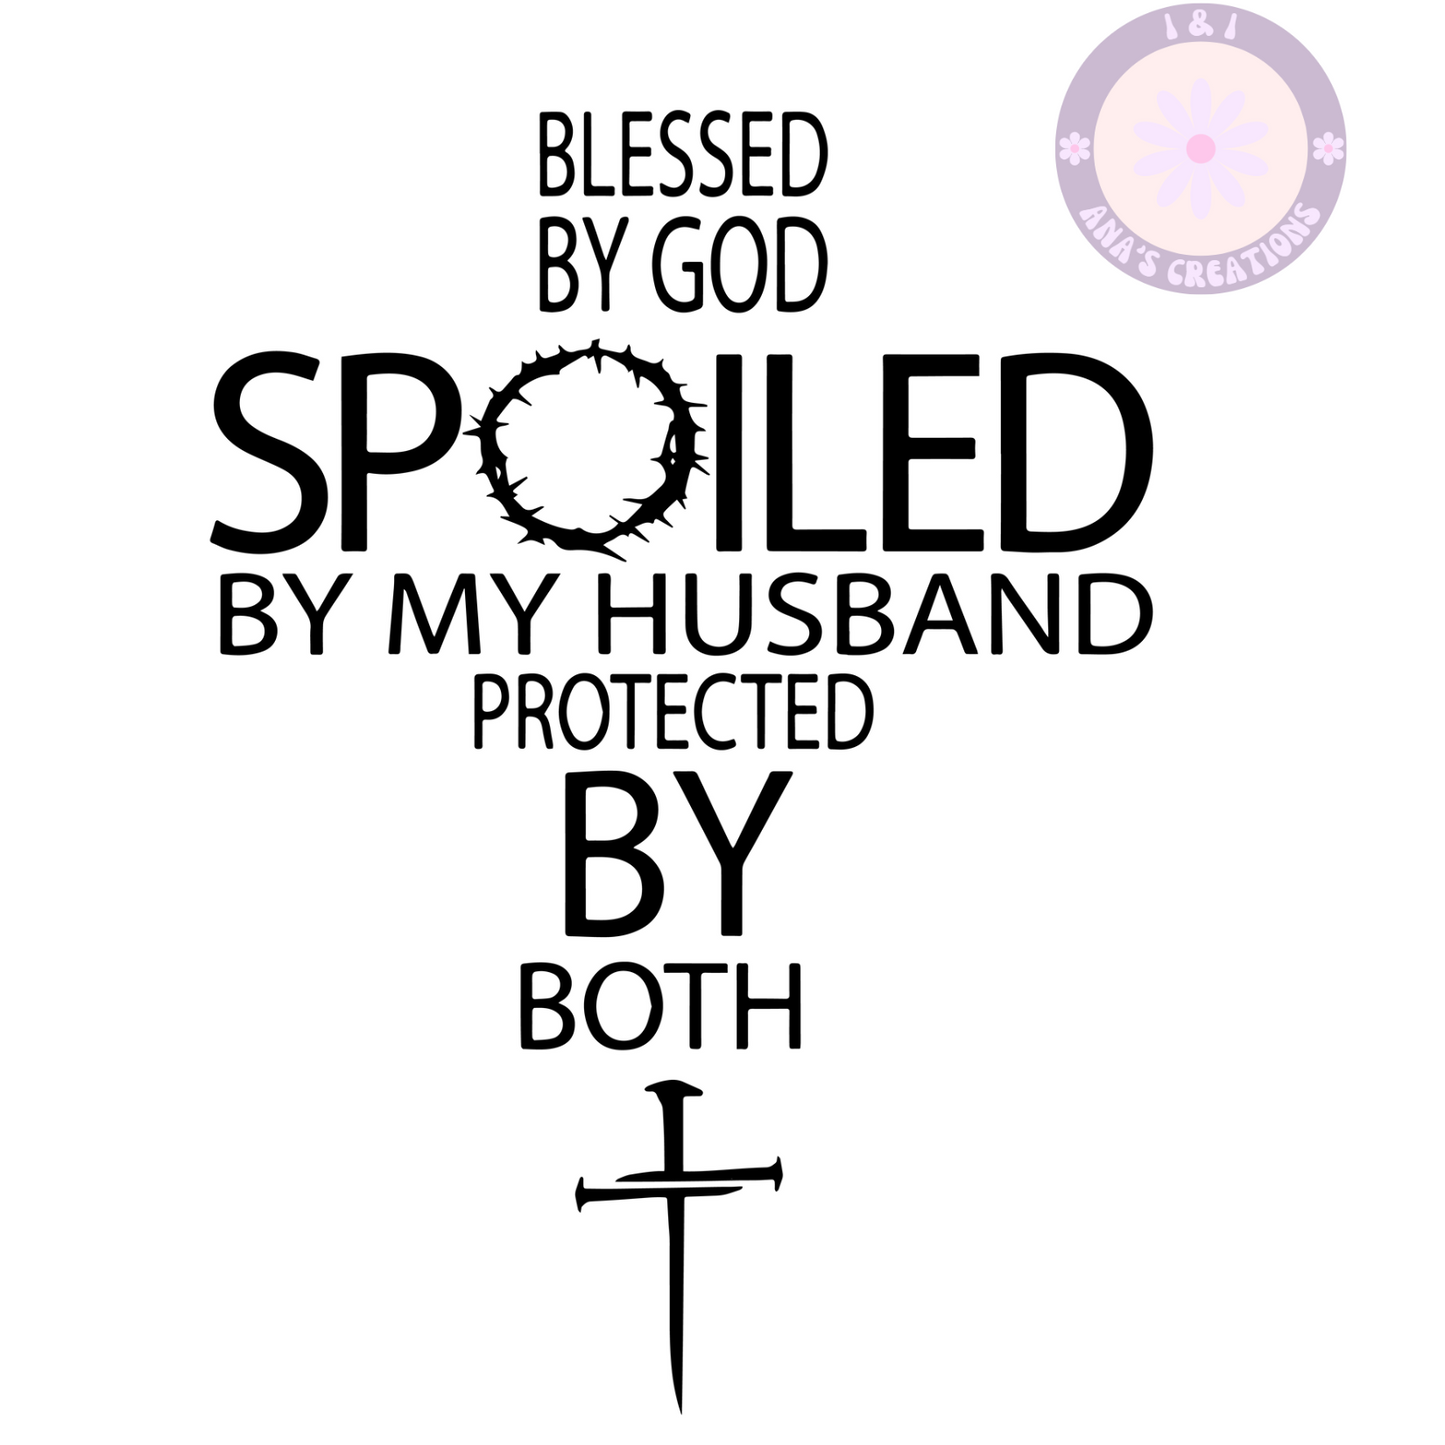 BLESSED BY GOD SPOILED BY MY HUSBAN PROTECTED BY BOTH.